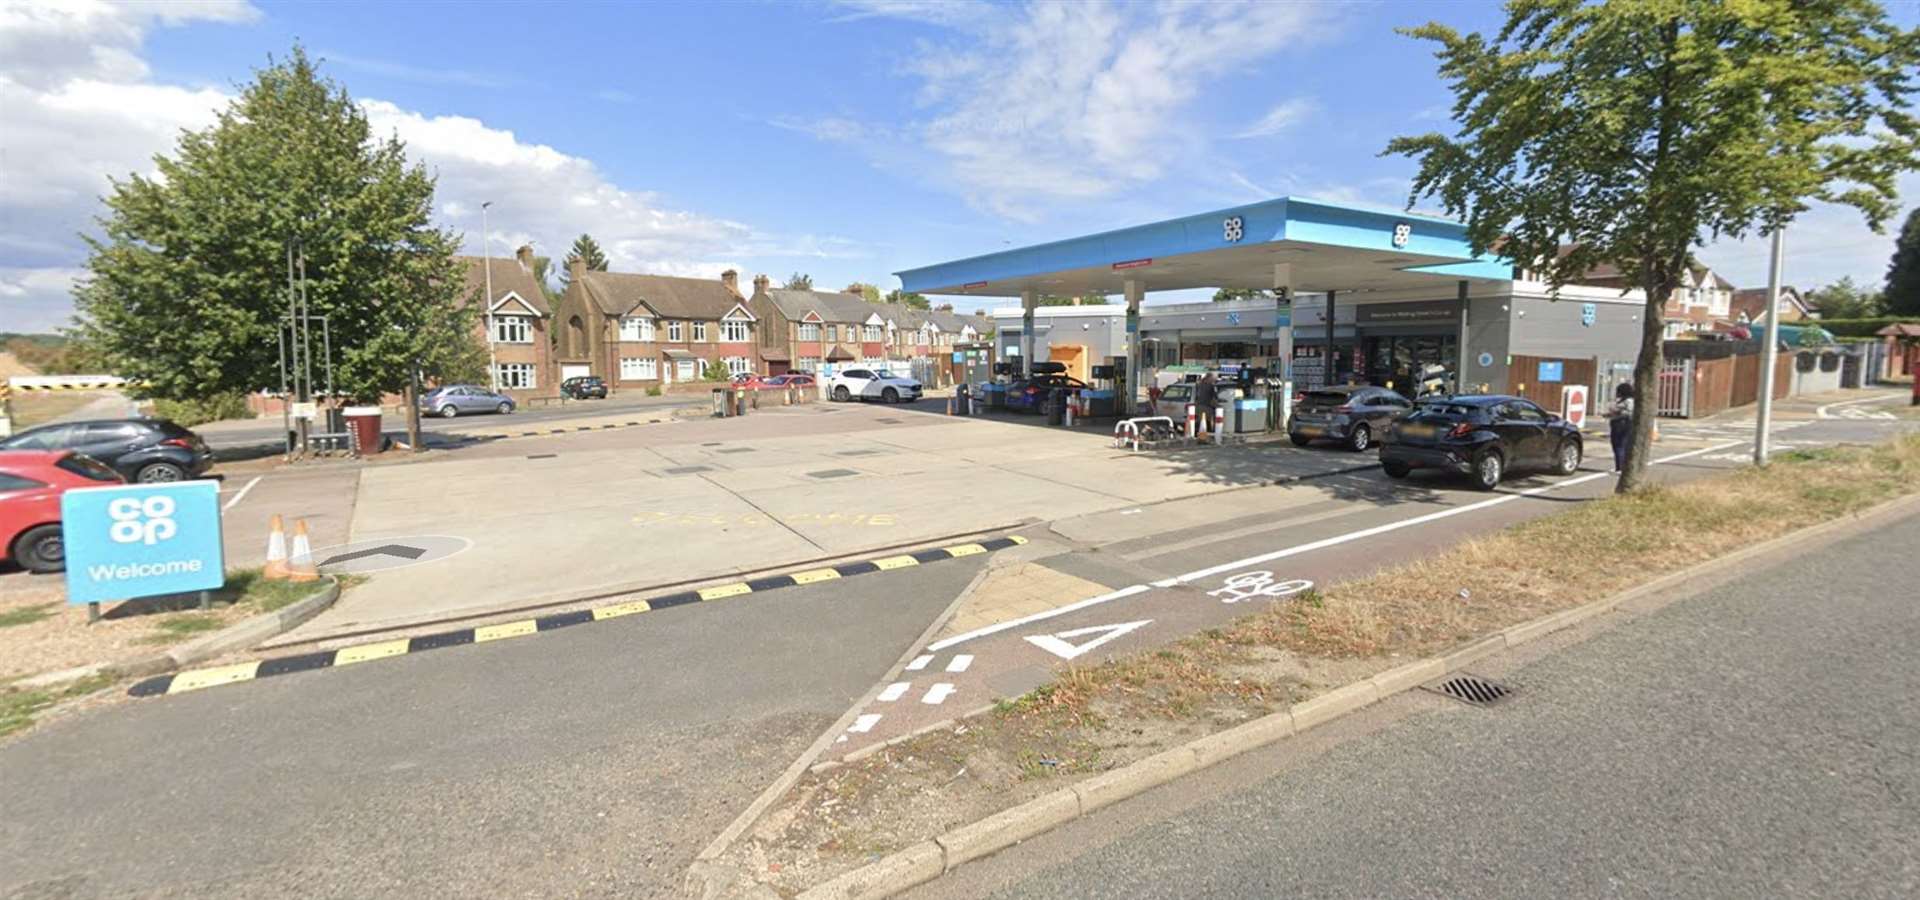 The Co-Op petrol station in Watling Street, Strood. Picture: Google Maps